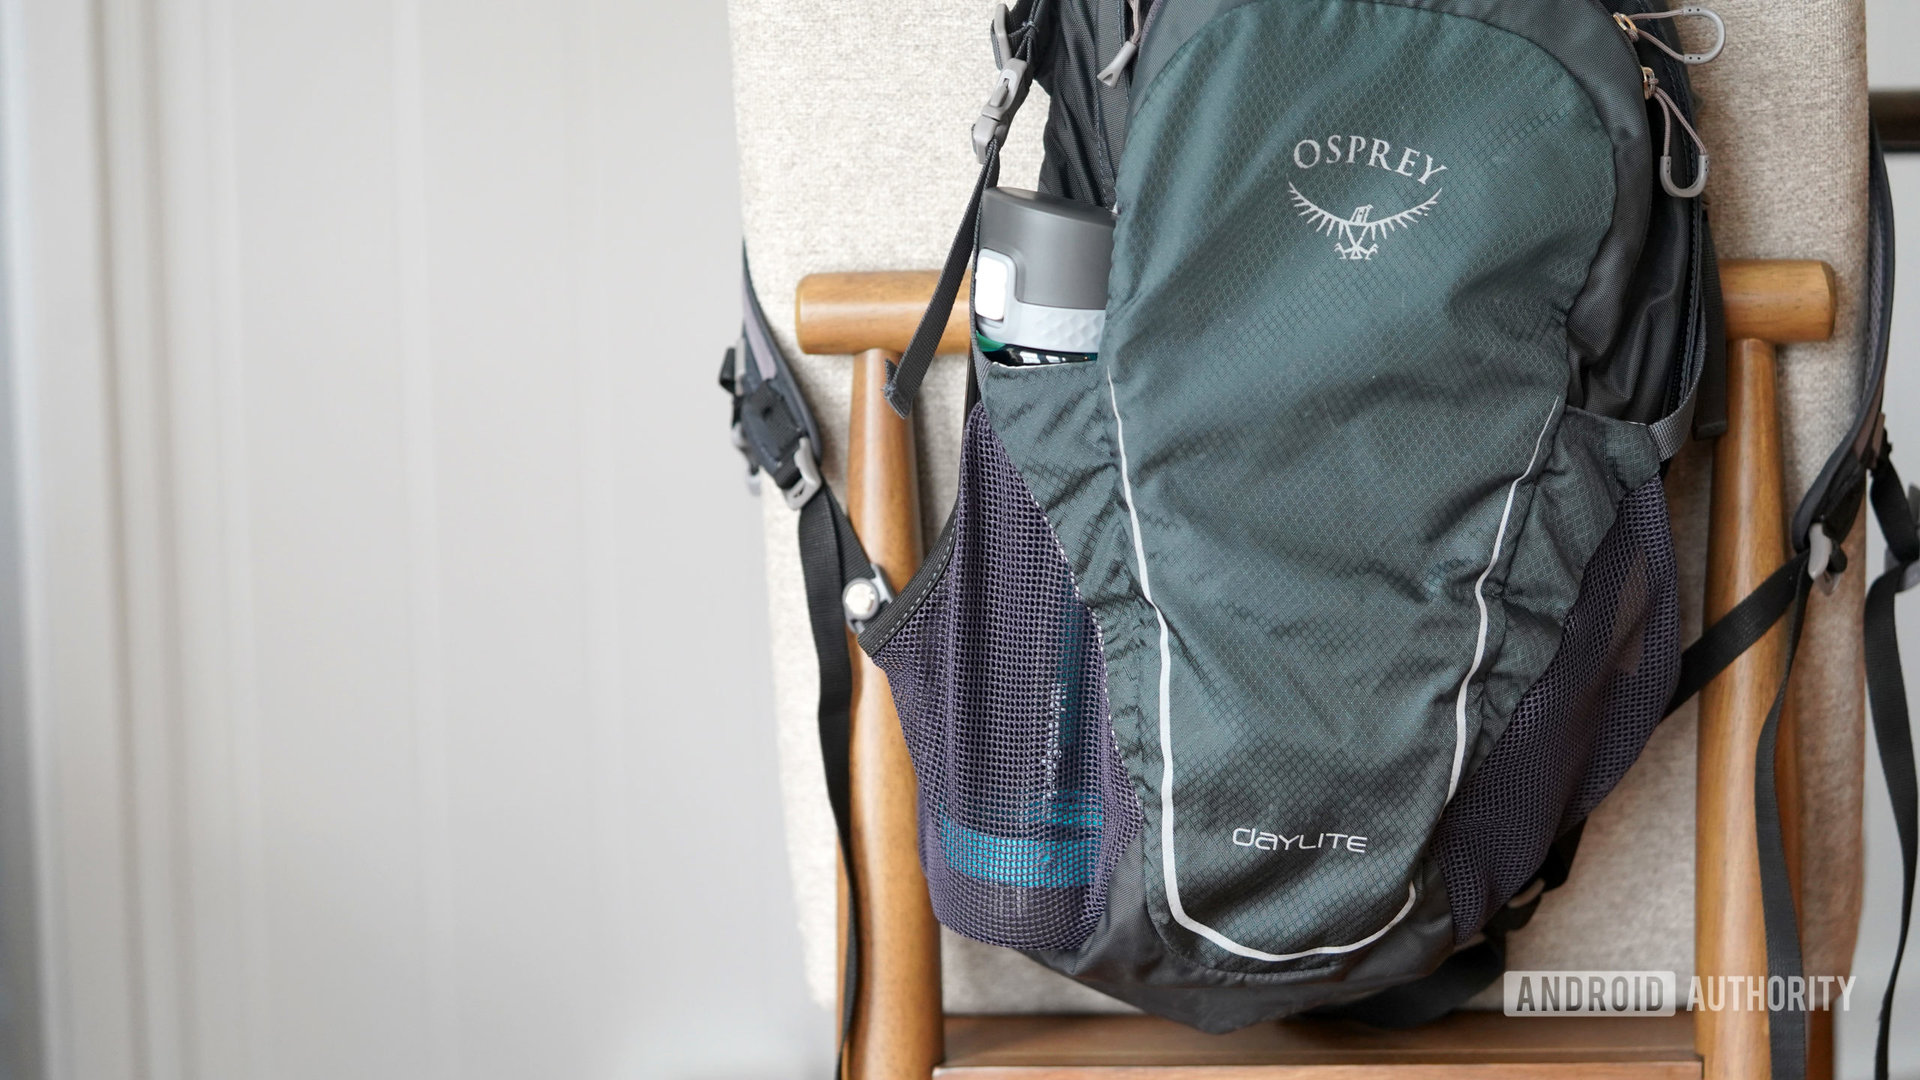 A HidrateSpark smart water bottle tucks into the side of a user's backpack.